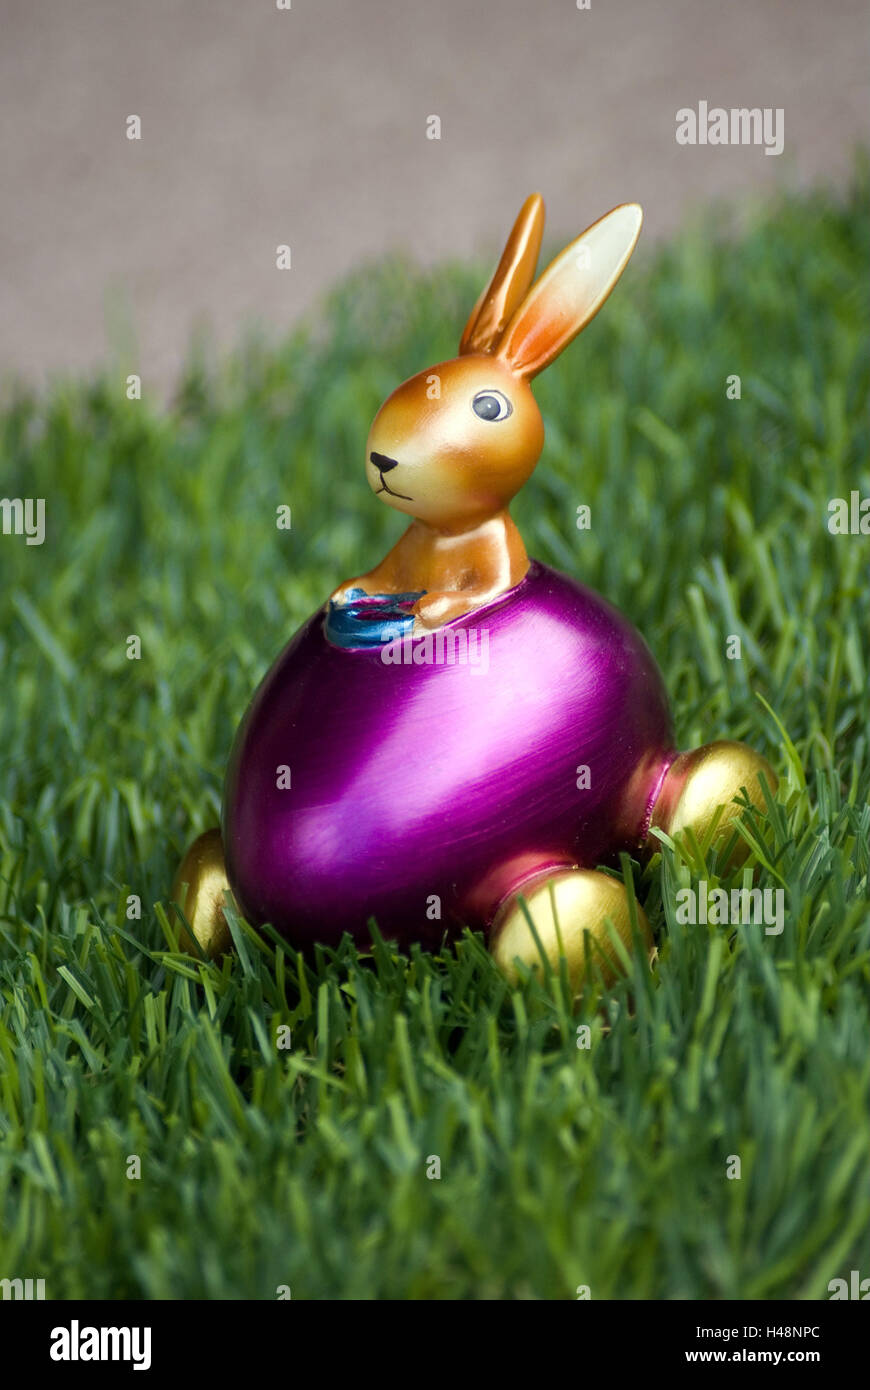 Osterdeko, Easter bunny, egg, decoration, kitsch, Easter, hare, mauve, pink, go, Easter egg, grass, Easter feast, decorate, character, toys, decoration, Stock Photo